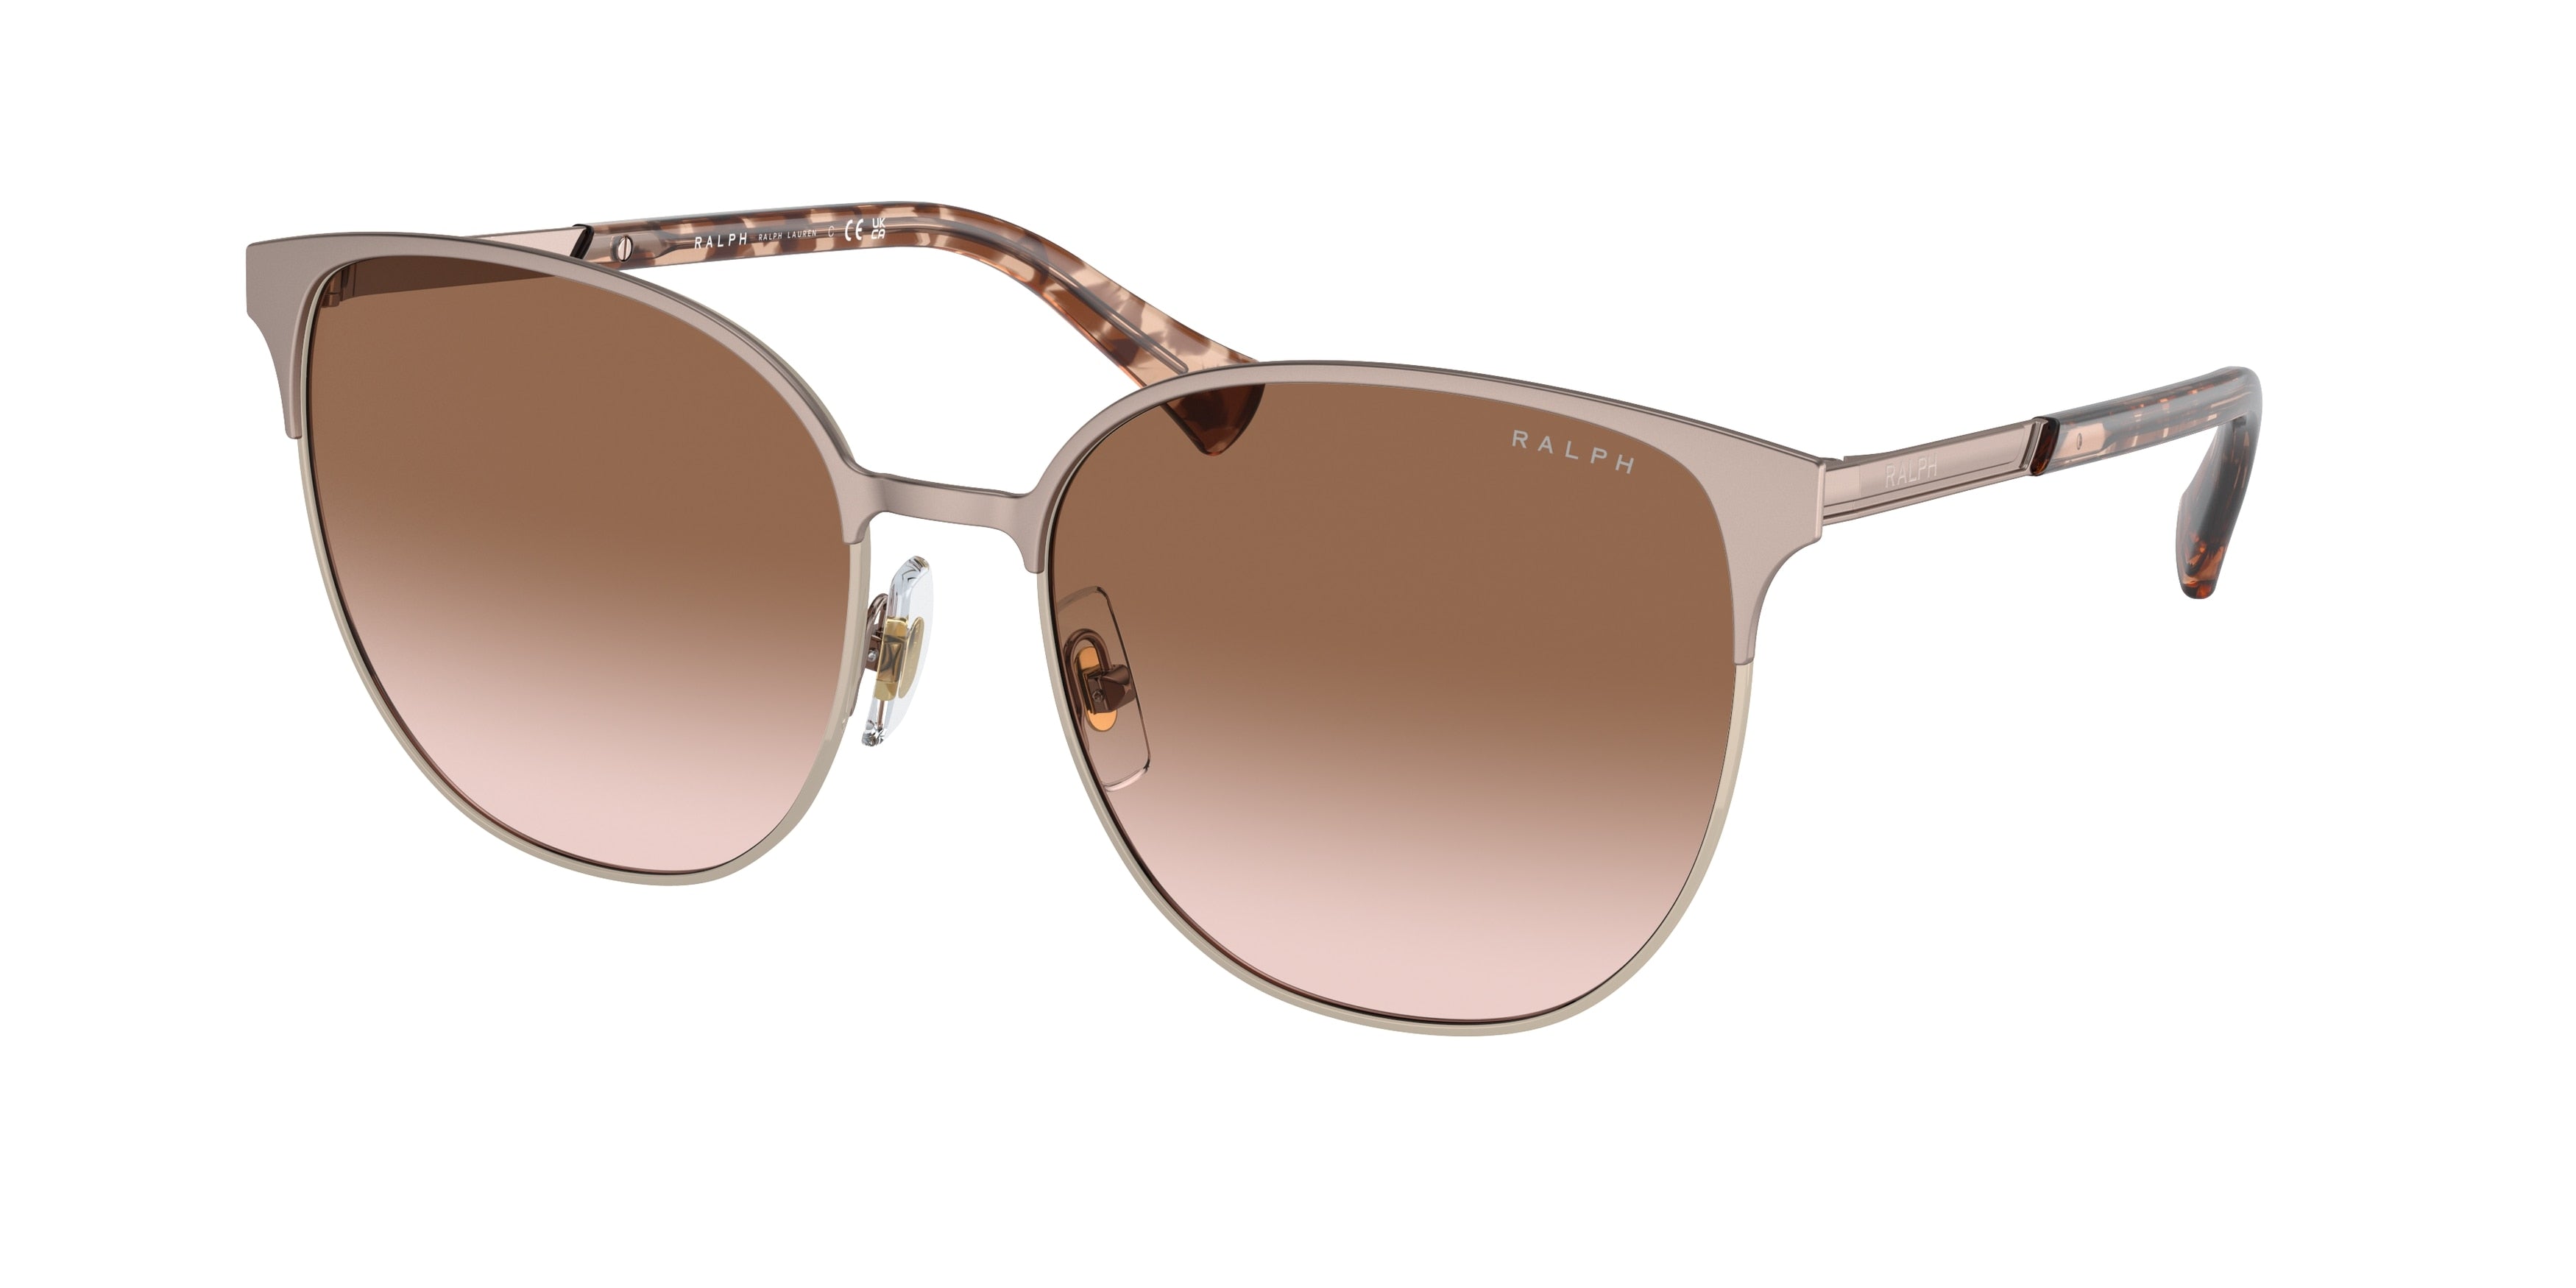 Ralph RA4140 Round Sunglasses  942713-Shiny Rose Gold 57-145-17 - Color Map Gold